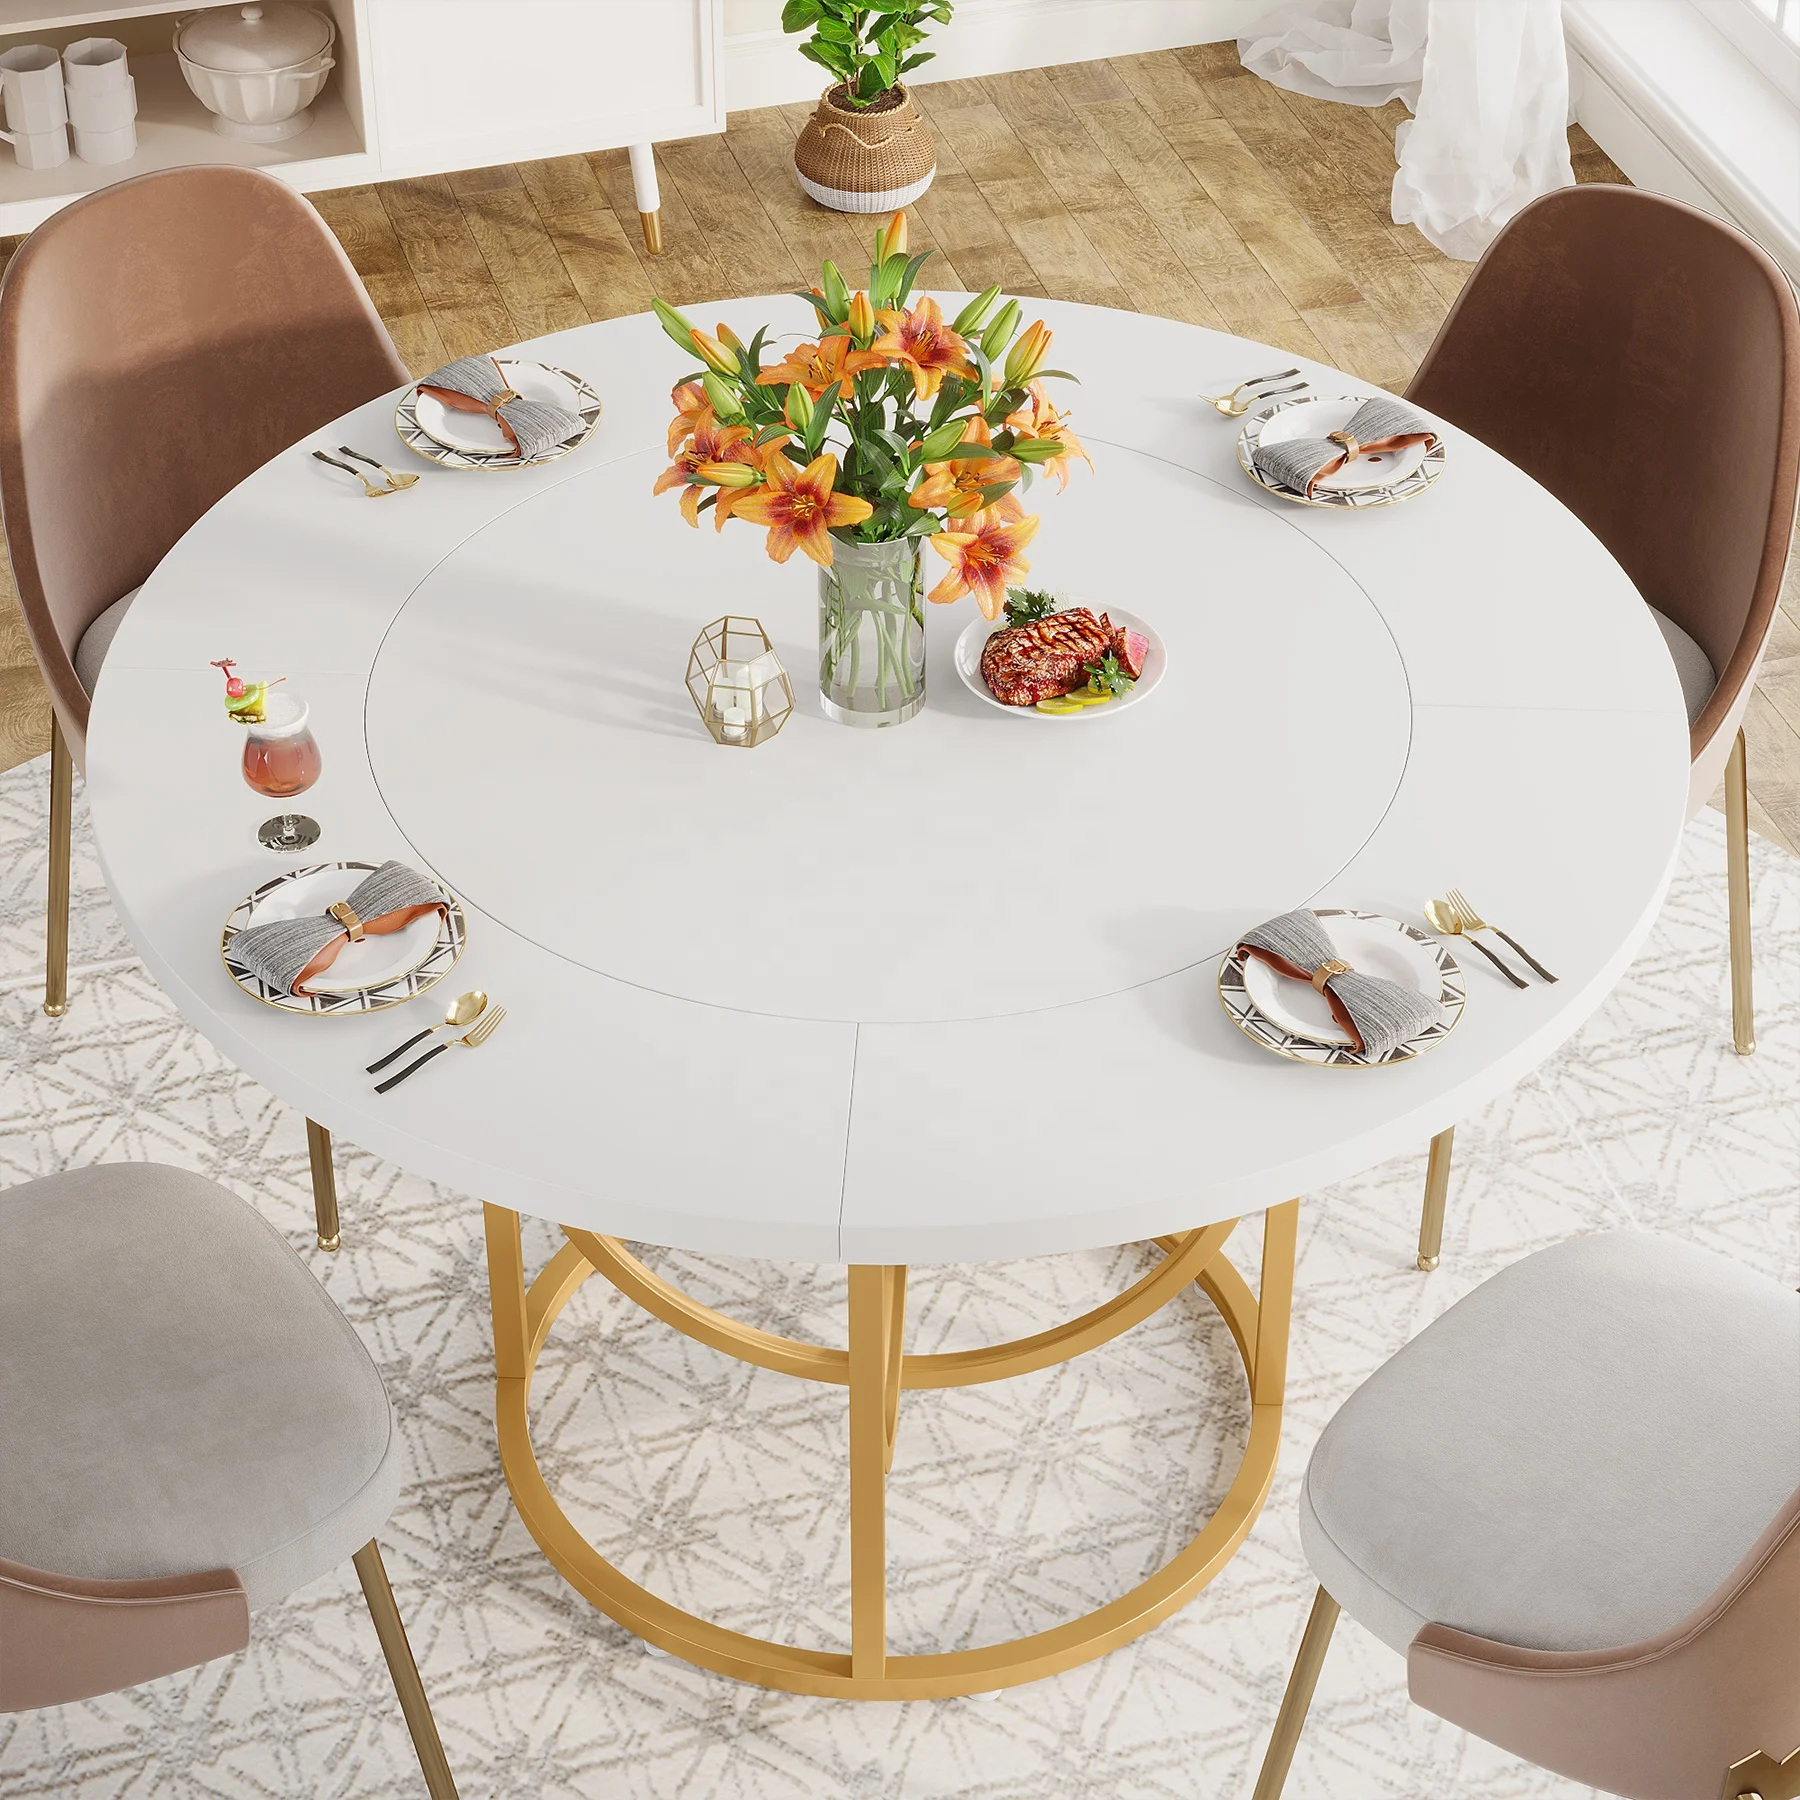 Tribesigns Modern Round 47 Inch White Kitchen Table with Gold Base Wood Dining Table Coffee Table for Home Furniture